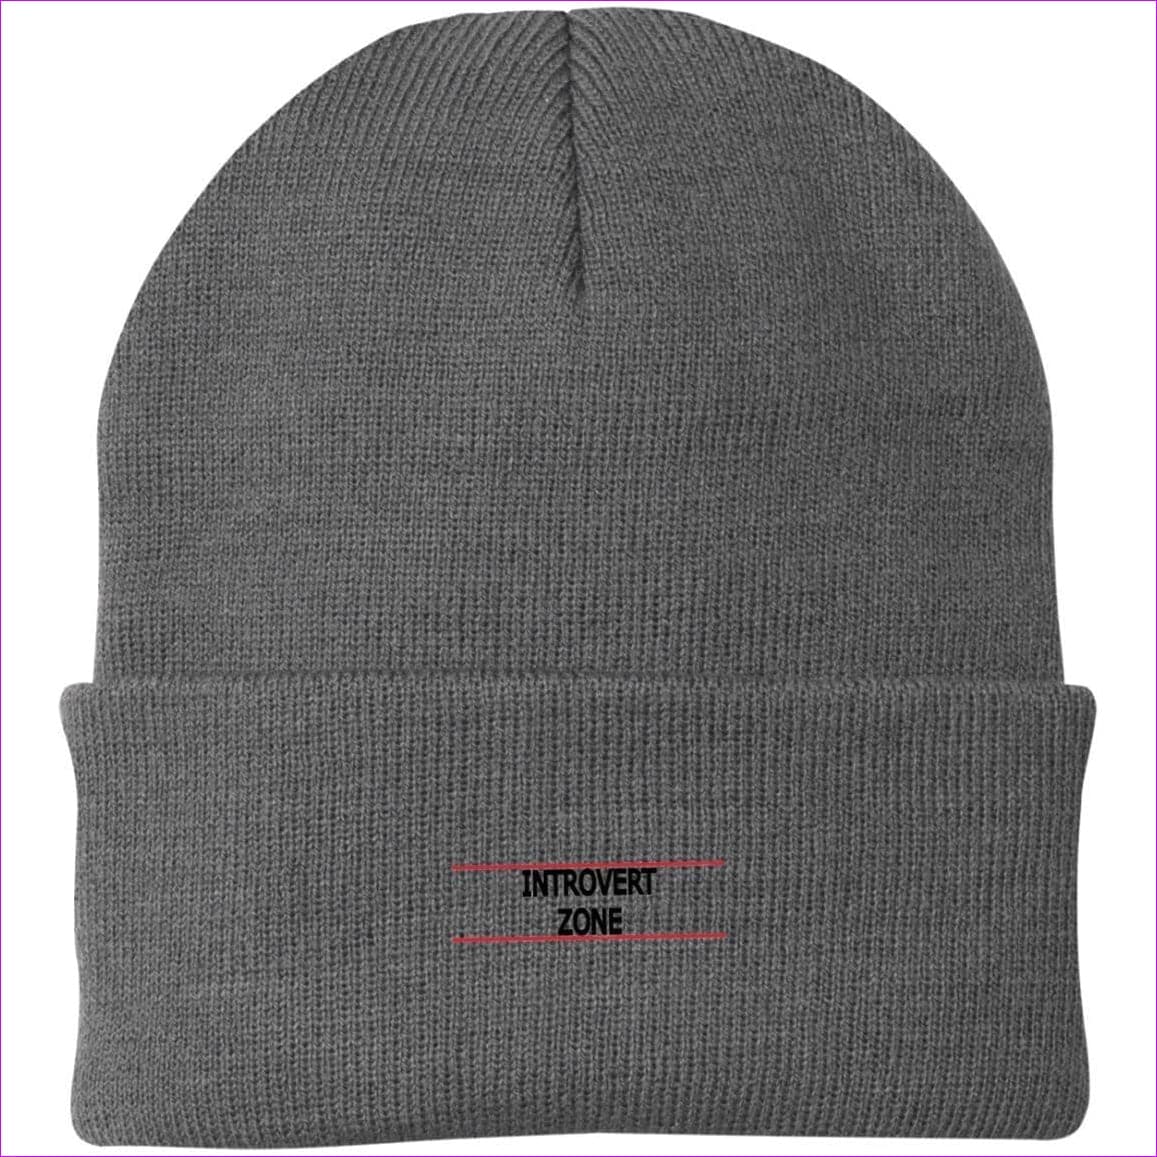 CP90 Knit Cap Athletic Oxford One Size - Introvert Zone Embroidered Knit Cap, Cap, Beanie - Hat at TFC&H Co.